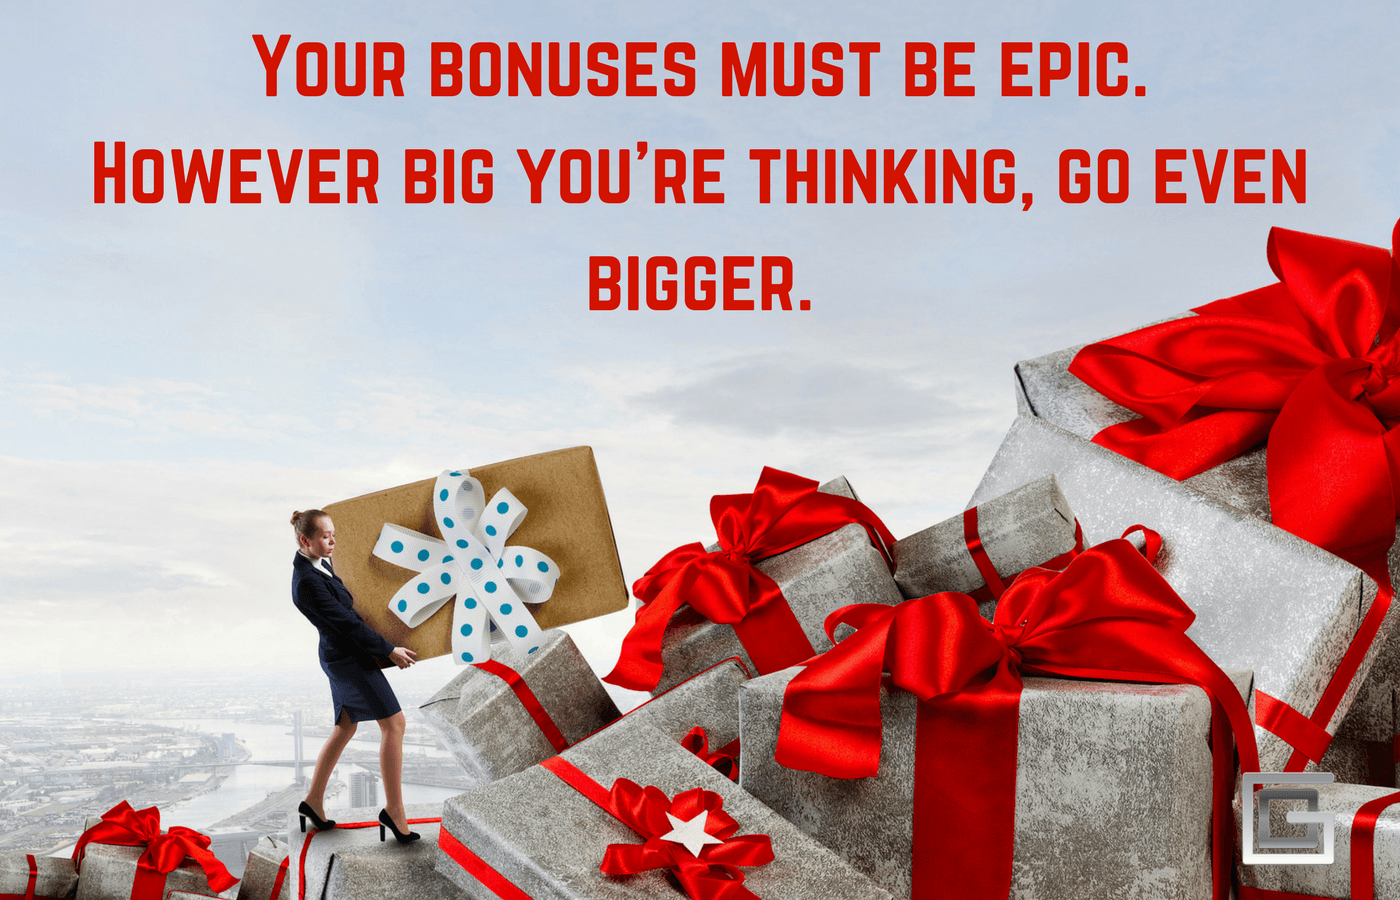 Epic, value packed bonuses are the key to a successful conversion rate.